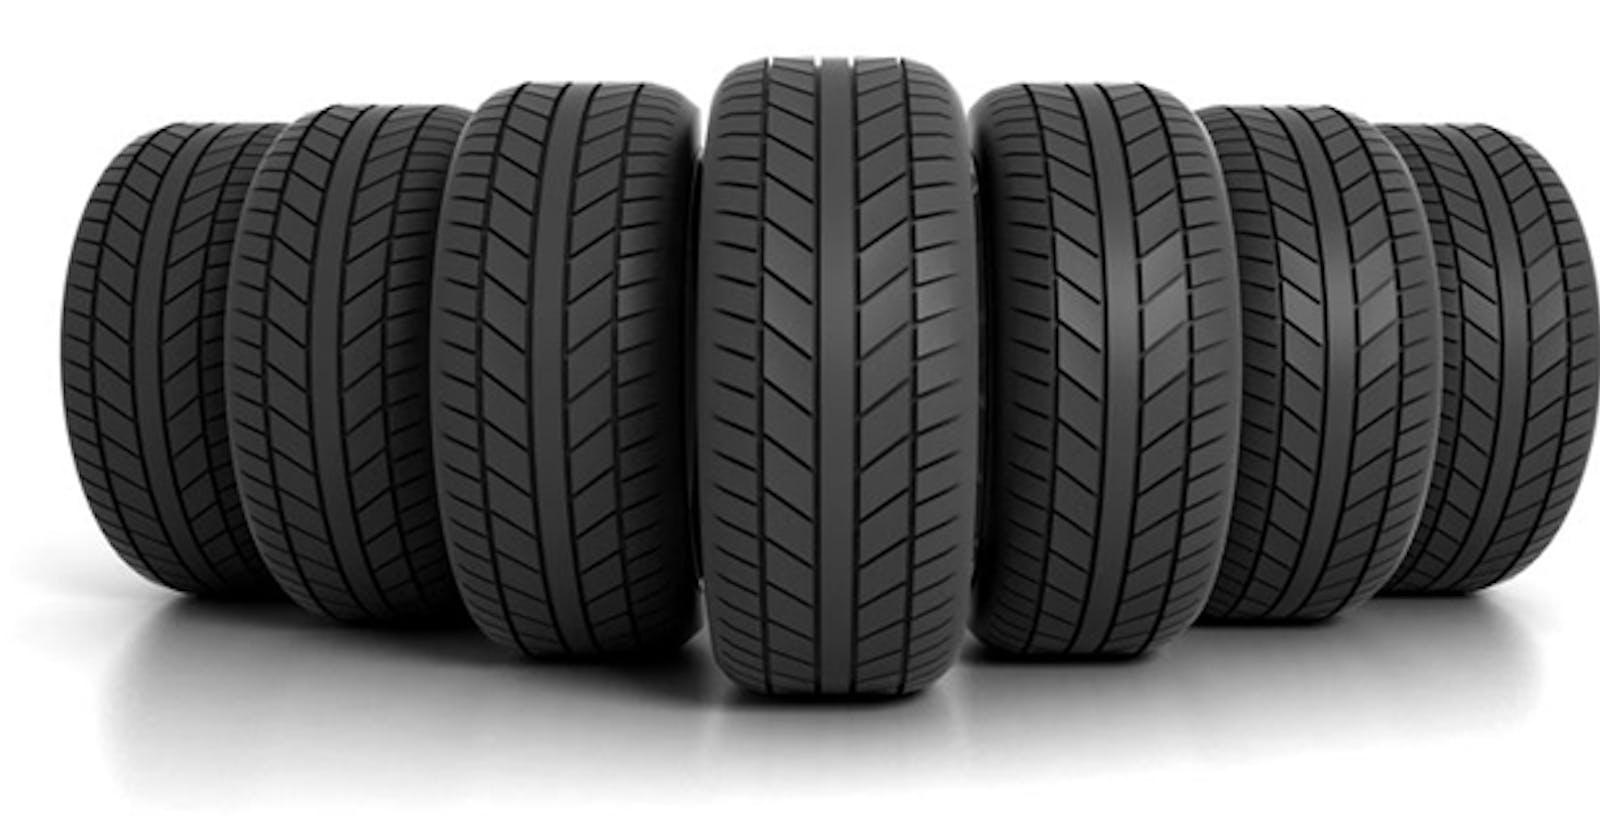 Affordable Traction: Finding Cheap Tyres in Harlow Without Compromising Quality